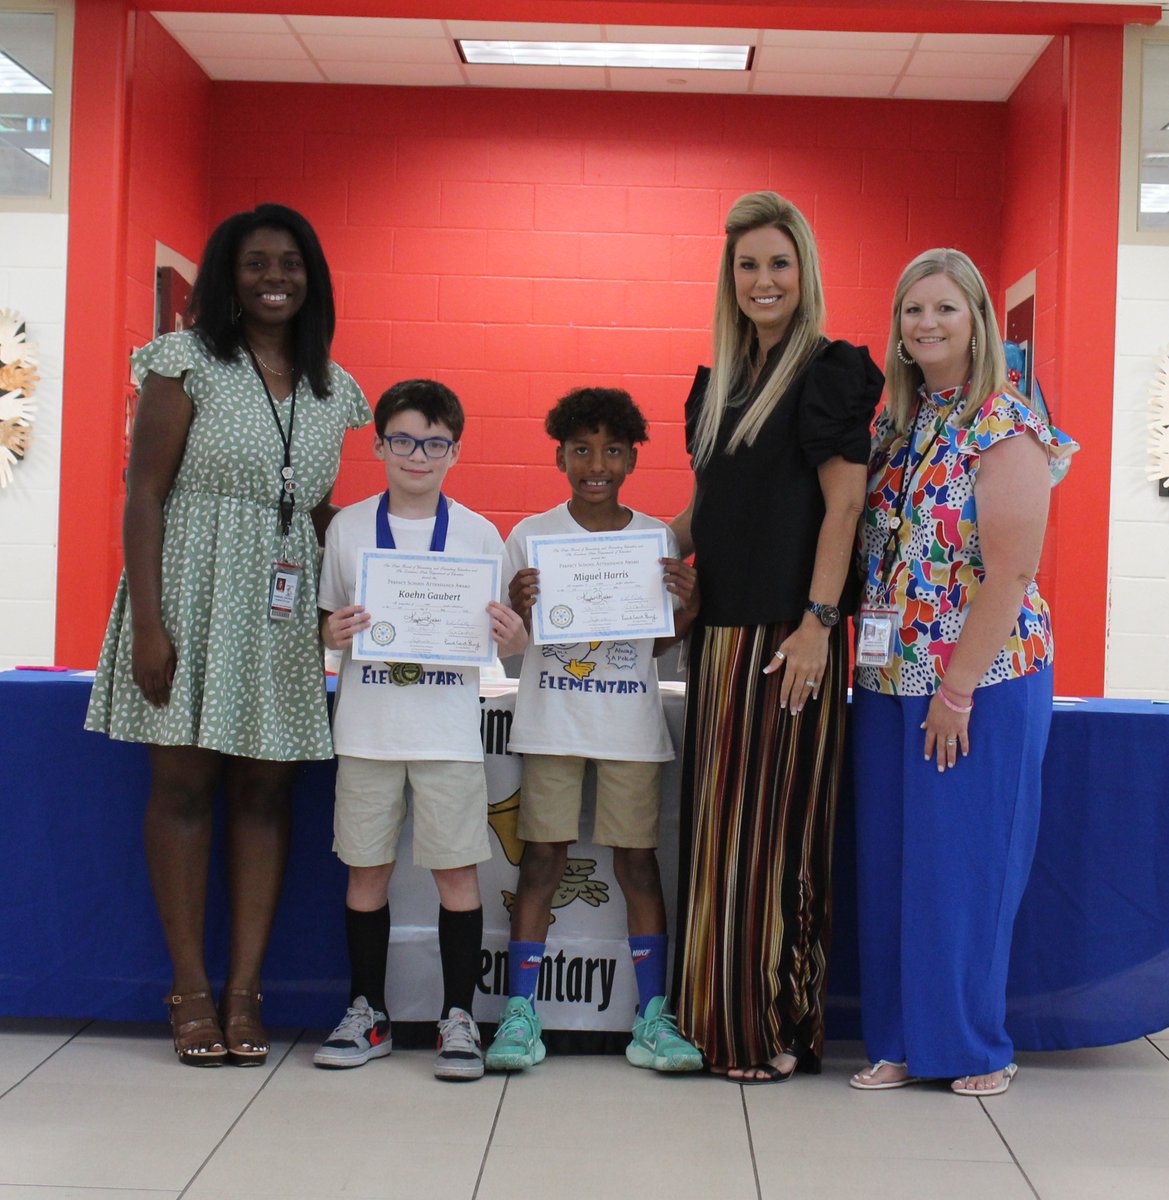 Congratulations to all of our second graders who earned awards! We know you are going to do great things @Lakewood_Gators! Thank you to former principals, Ms. Clement and Ms. Sumrall, for coming back to MPE to present your awards.